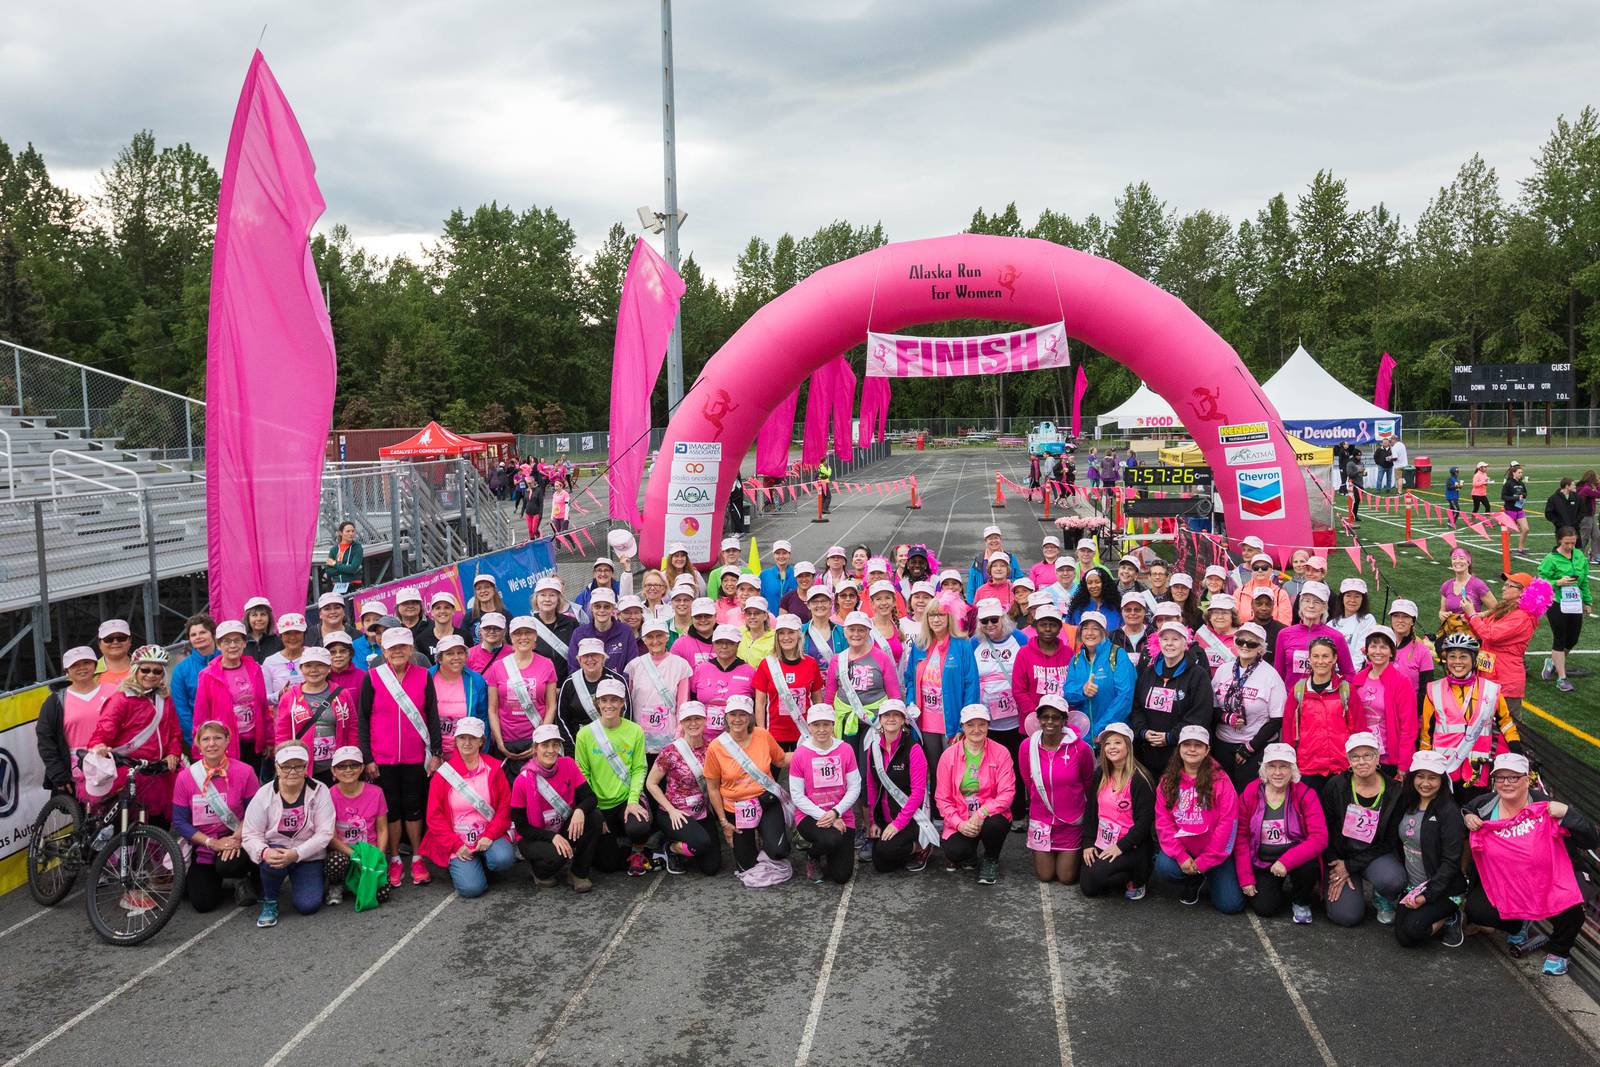 Thousands turn course pink during Alaska Run for Women Anchorage